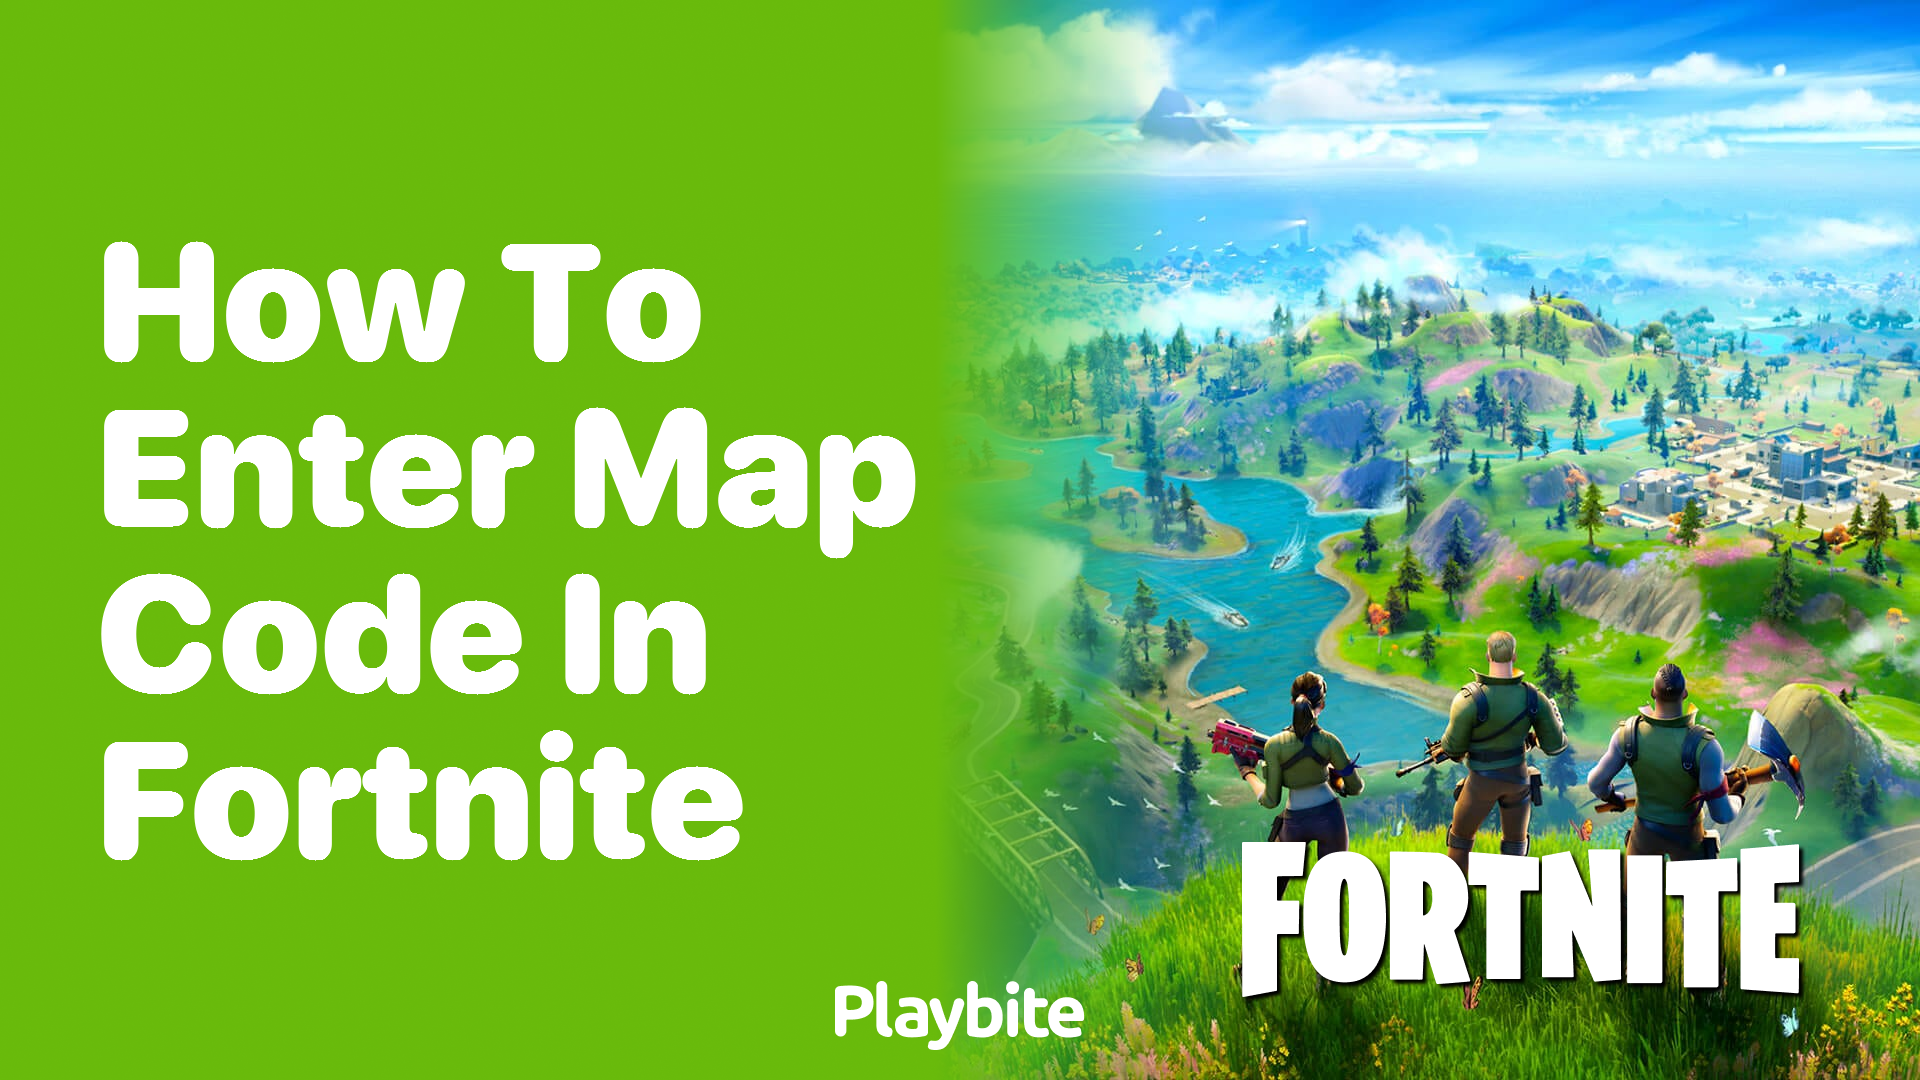 How to Enter Map Code in Fortnite